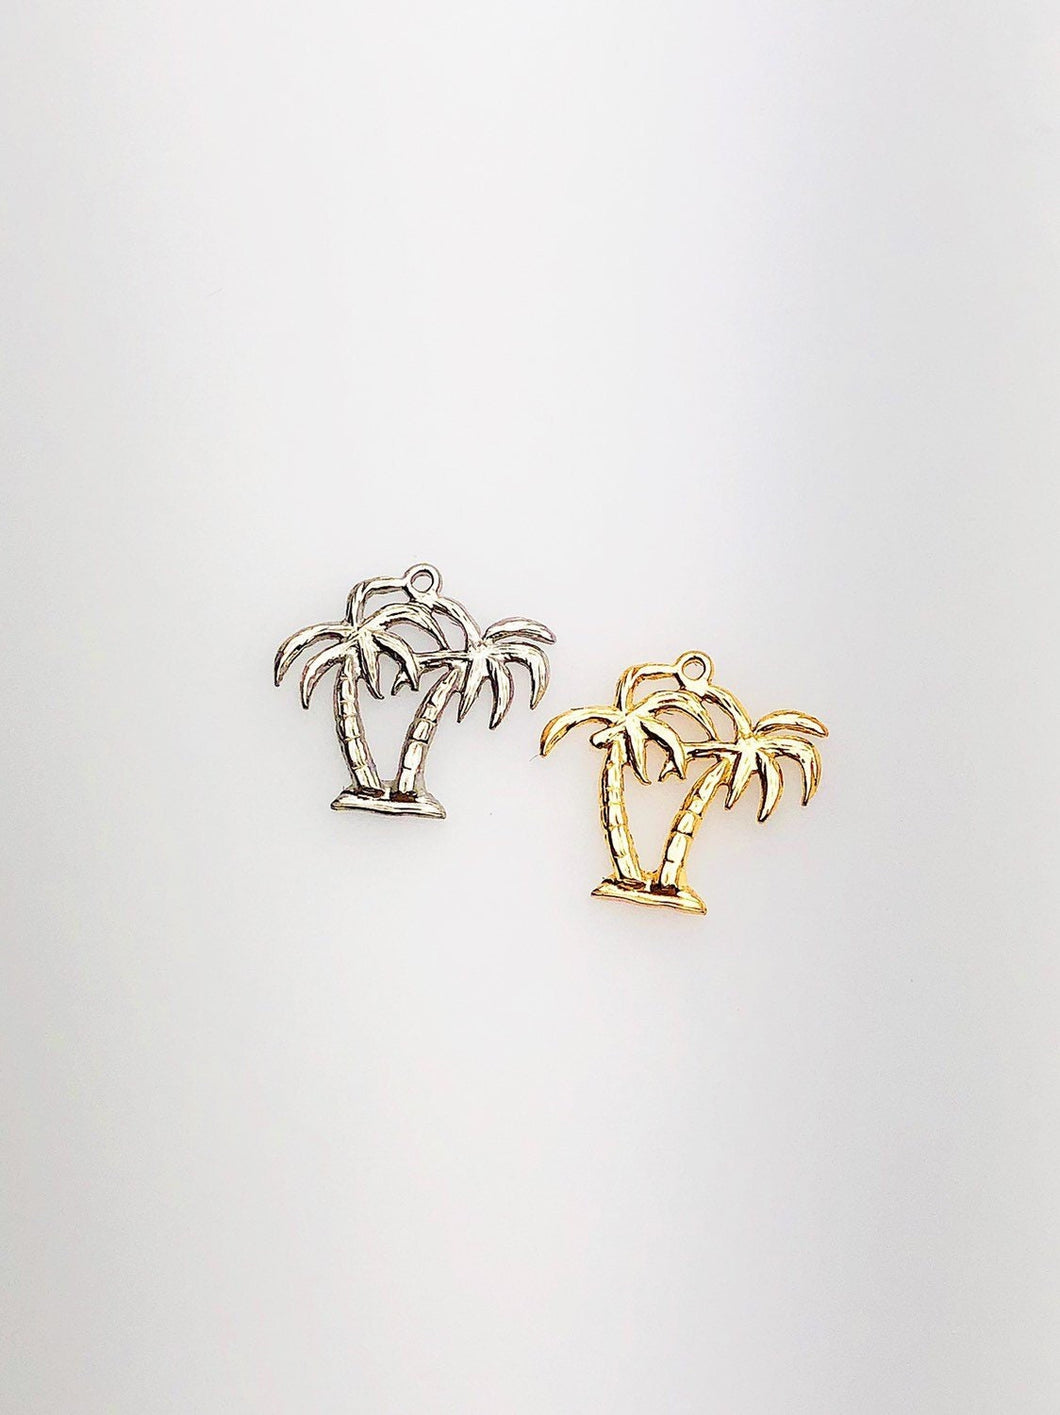 14K Solid Gold Palm Trees Charm w/ Ring, 11.9x12.2mm, Made in USA (L-13)